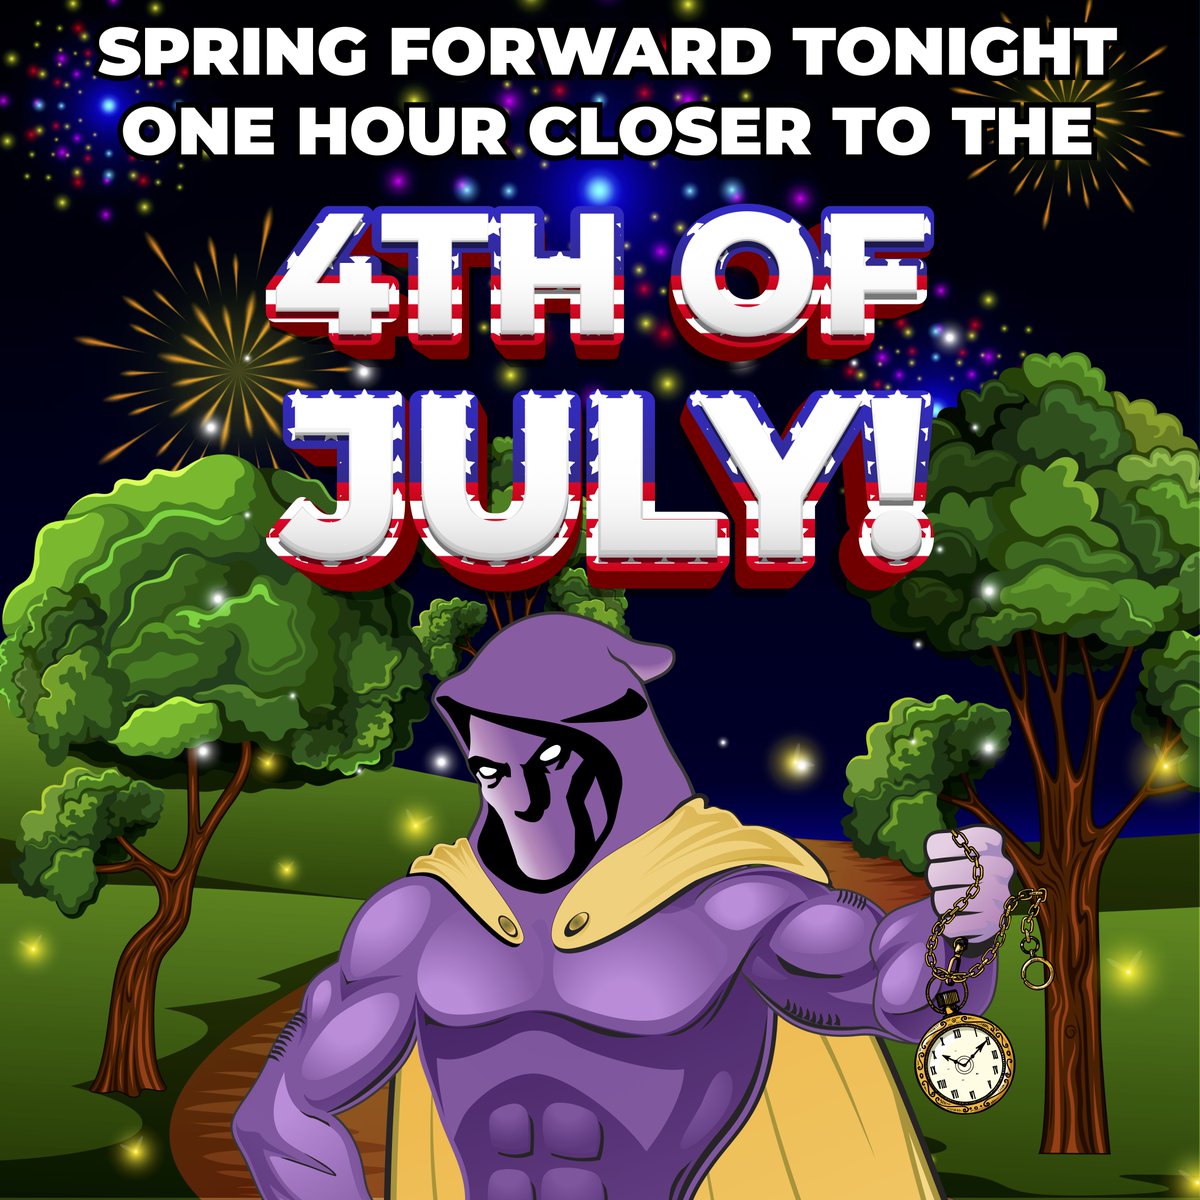 Daylights Saving means one hour closer to our favorite holiday, THE FOURTH OF JULY! ⏰ ⏰ ⏰ ⏰ #phantomnation #fireworks #lightupthesky #july4th #phantomfireworks #springcleaning #springahead #daylightsavingstime #marchmadness #stpatricksday